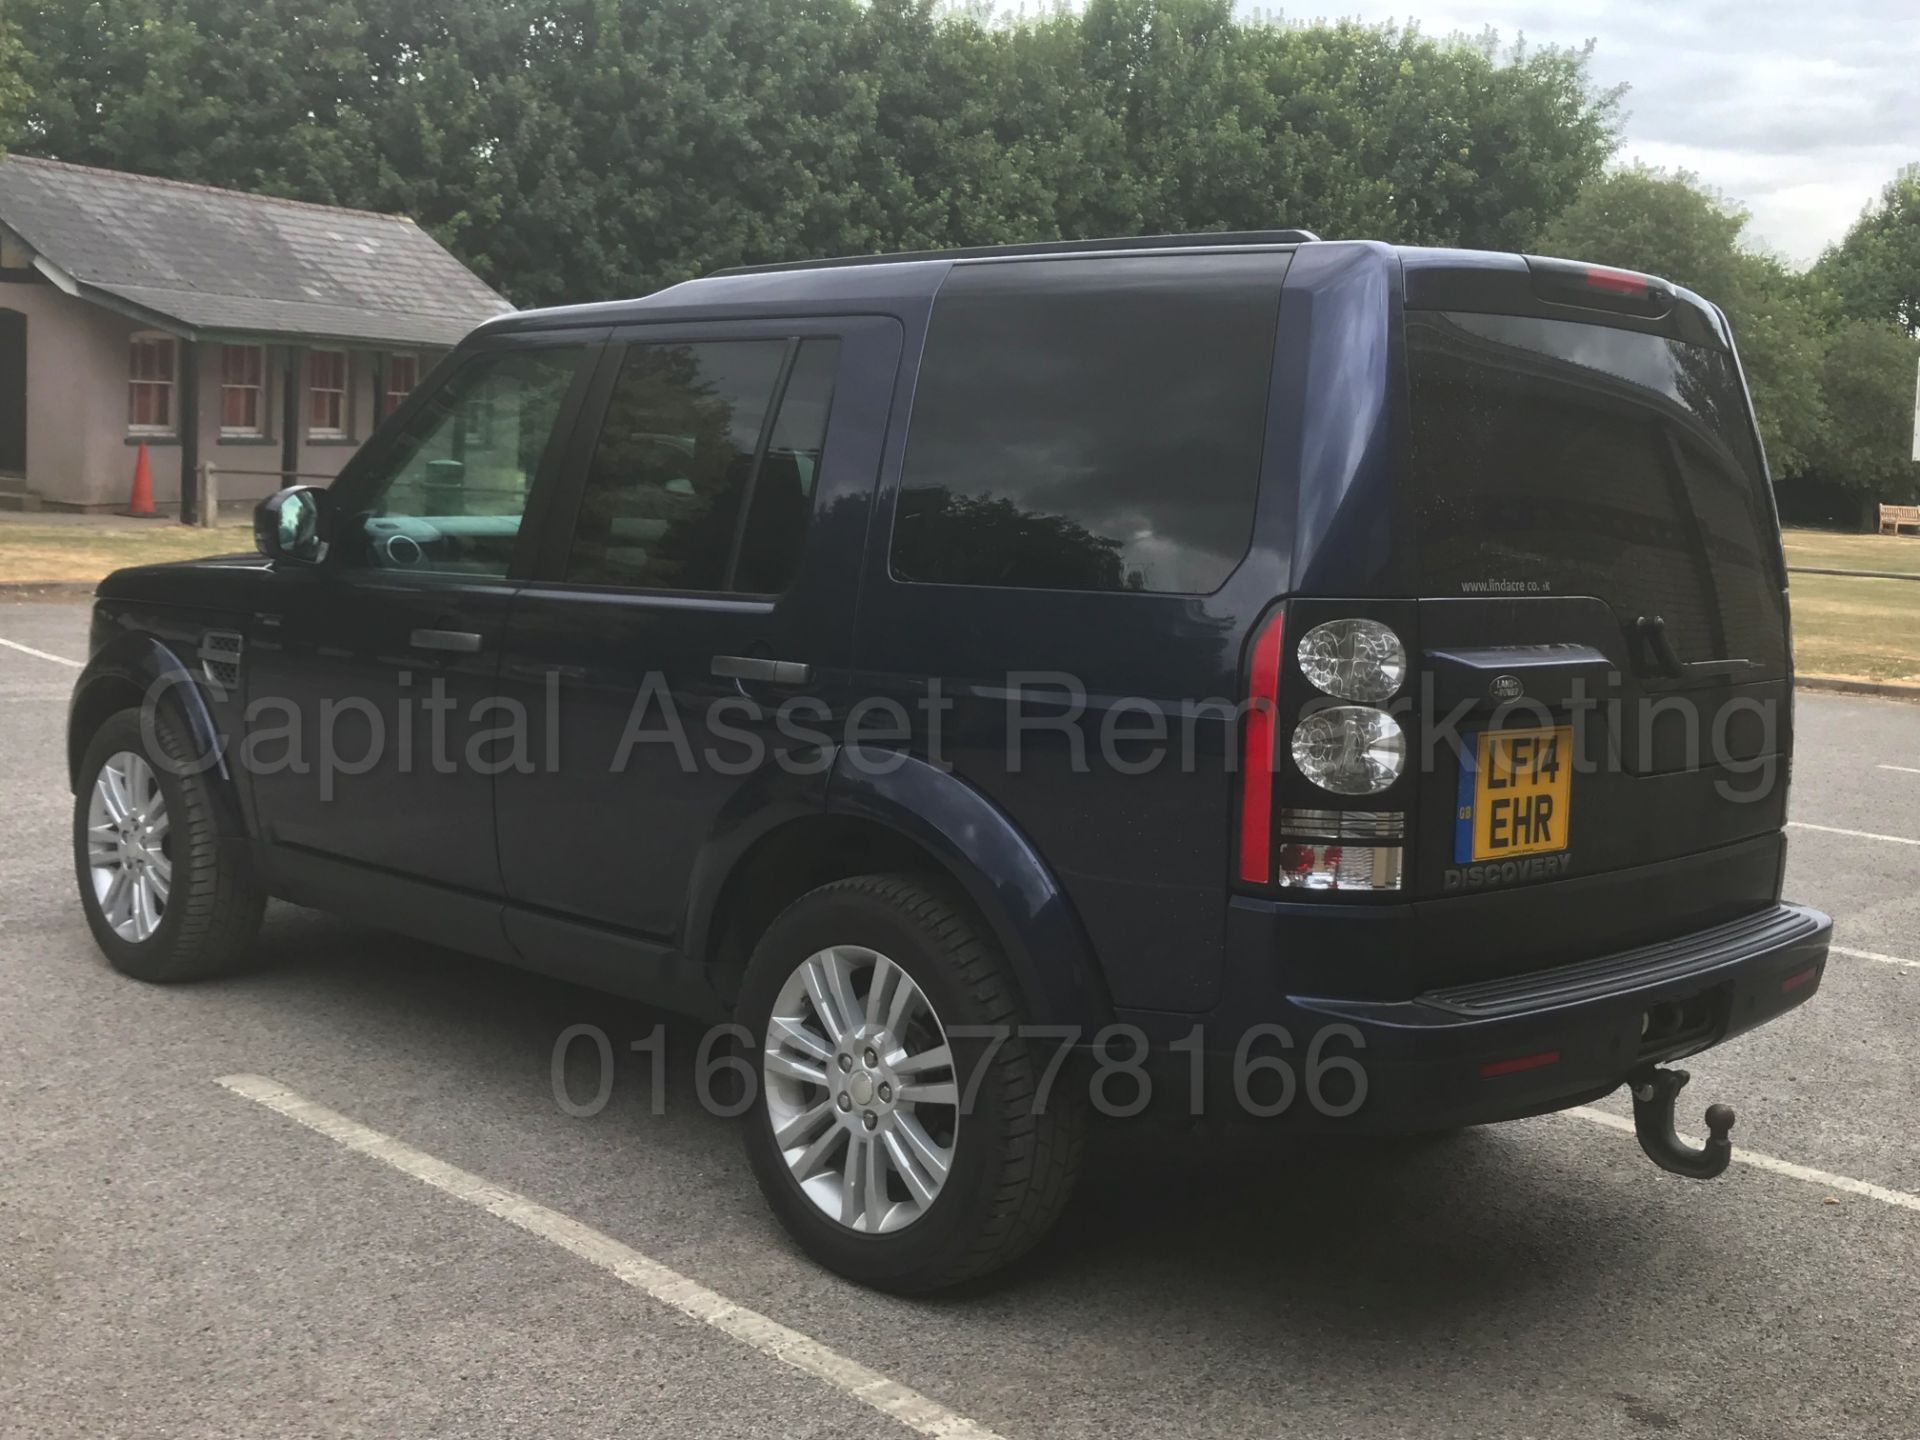 (On Sale) LAND ROVER DISCOVERY *XS EDITION* (2014) '3.0 SDV6 - 225 BHP- 8 SPEED AUTO' *MASSIVE SPEC* - Image 7 of 48